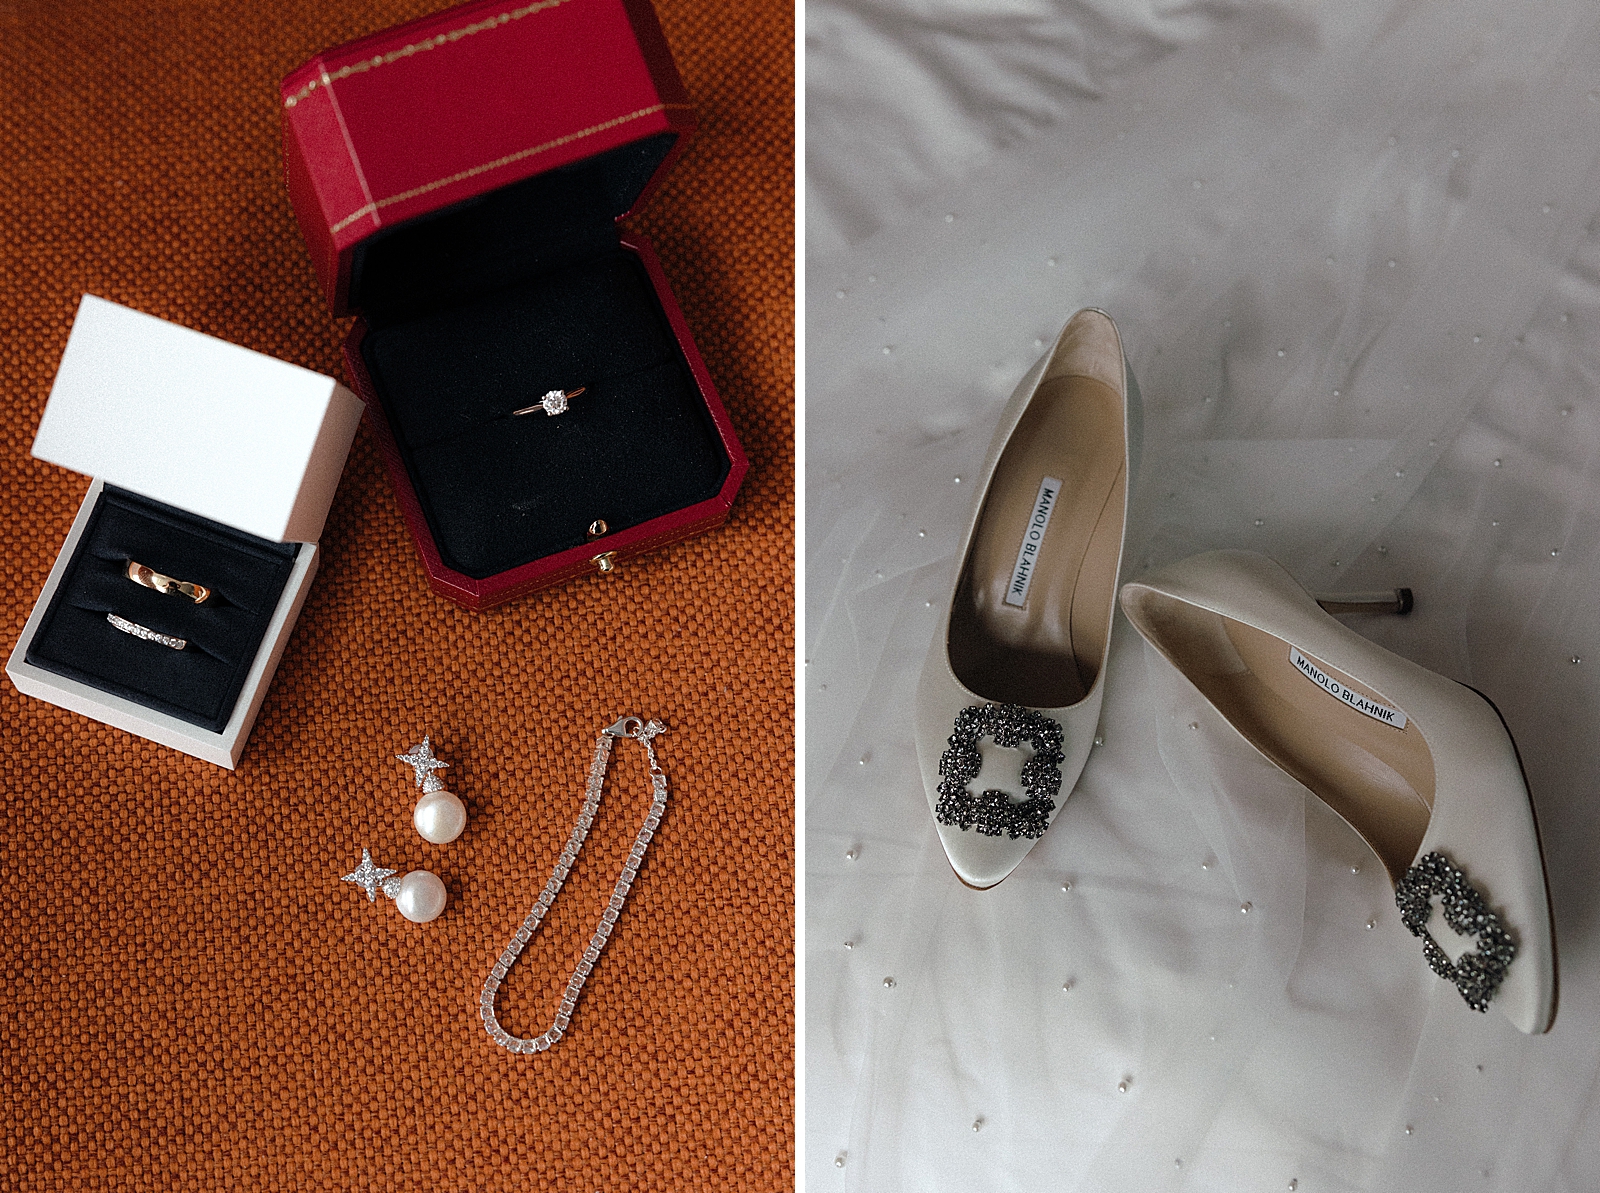 Left photo: Up close shot of the bride and groom's jewelry.
Right photo: Shot of the bride's heels.